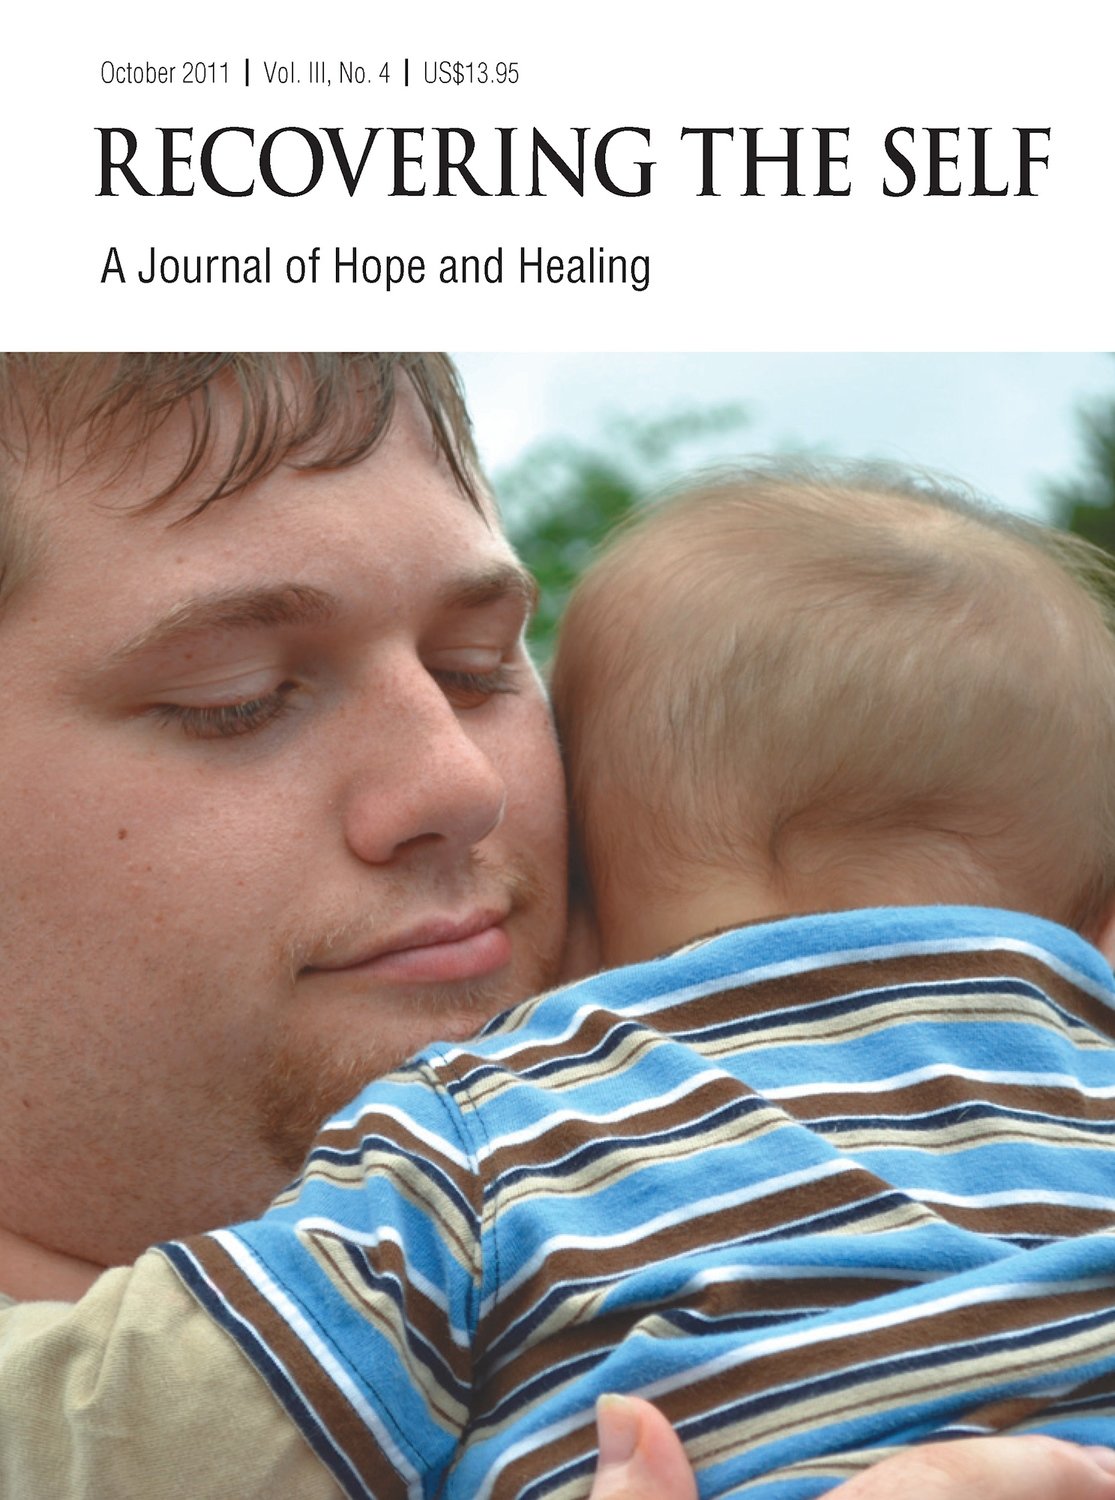 Recovering The Self: A Journal of Hope and Healing (Vol. III, No. 4) -- Focus on Parenting